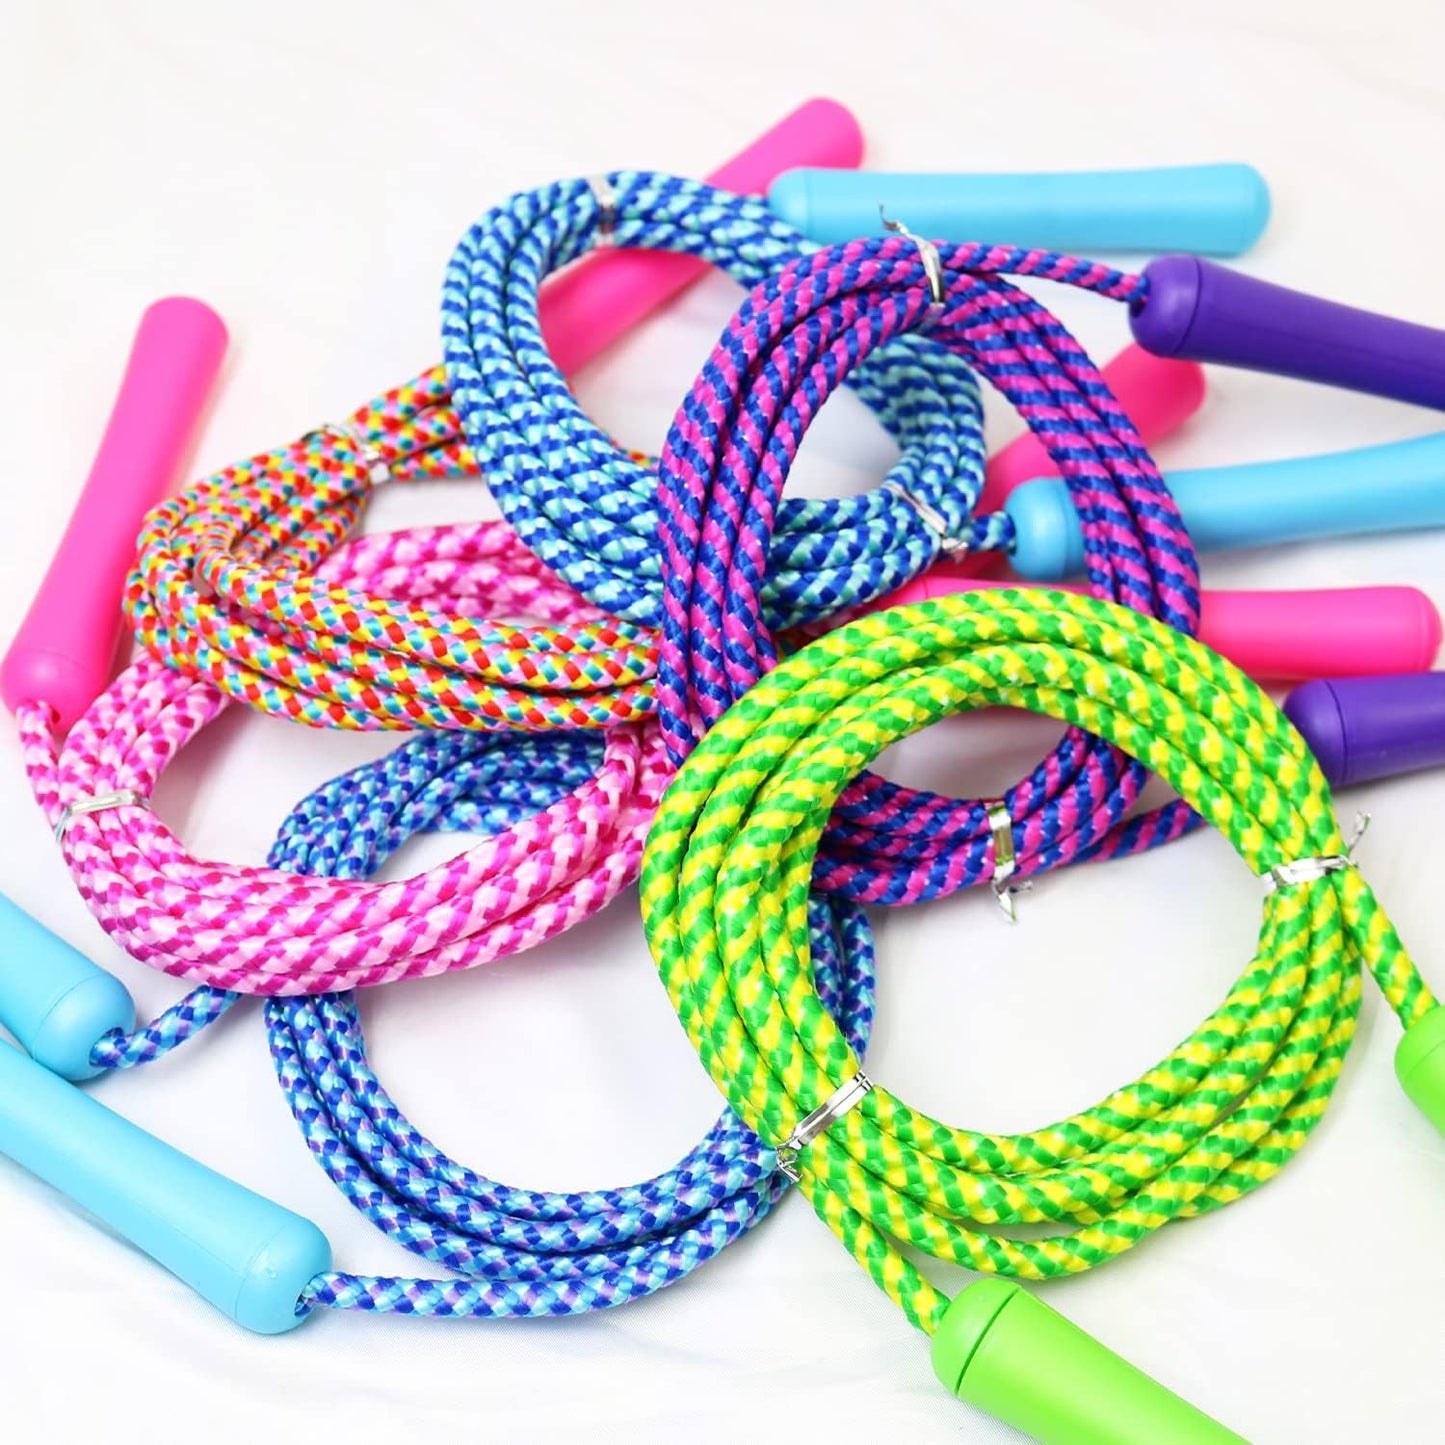 GIFTEXPRESS Adjustable Size Colorful Jump Rope for Kids and Teens, Assorted Colors (Pack of 6)